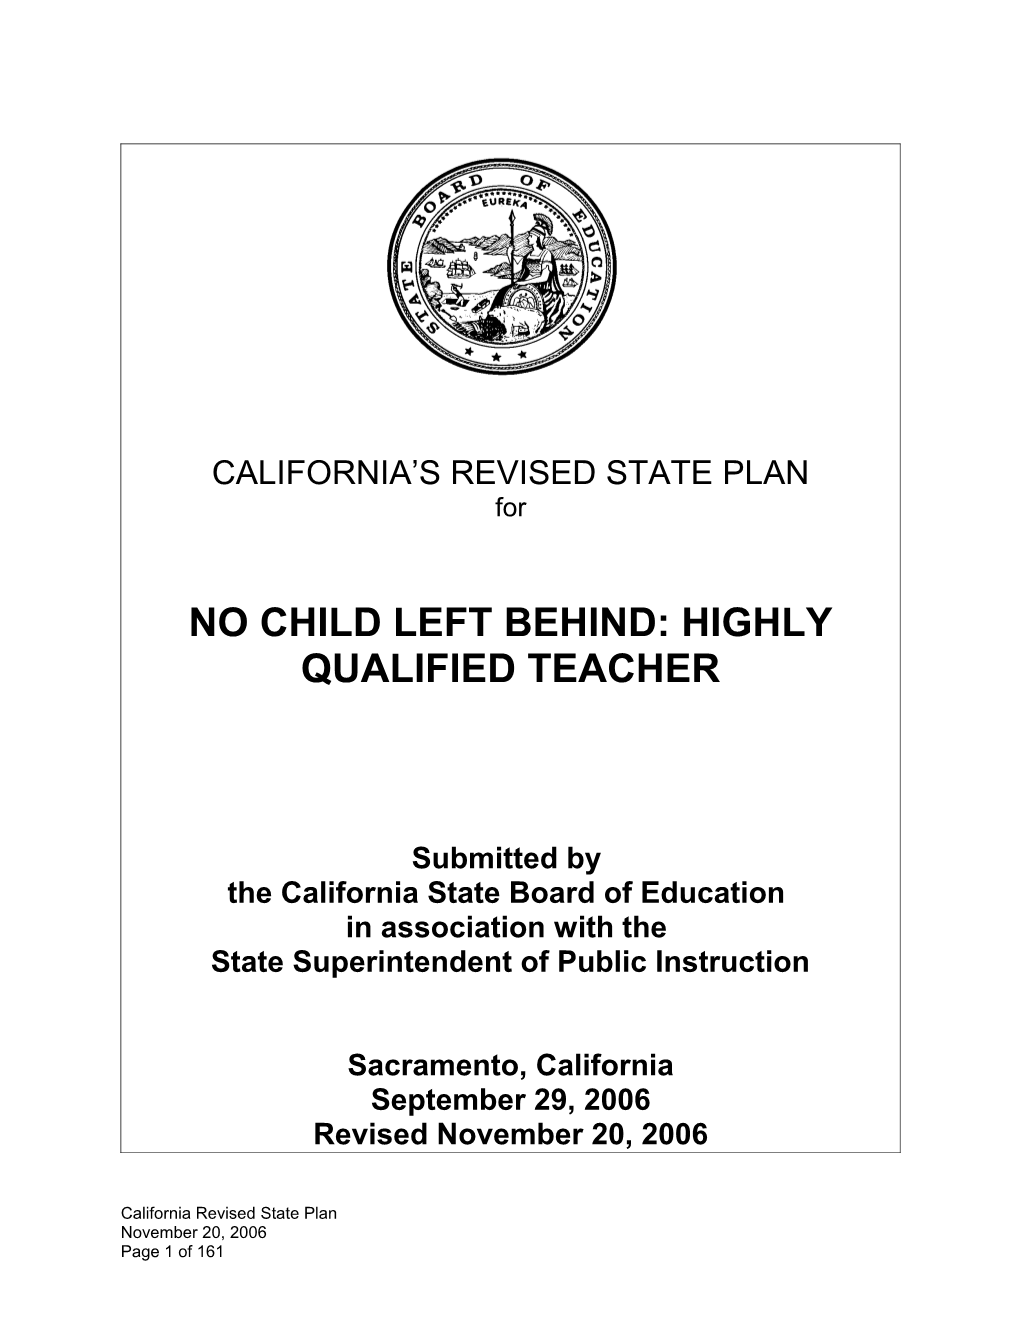 California - Revised Highly Qualified Teachers State Plan (MS WORD)